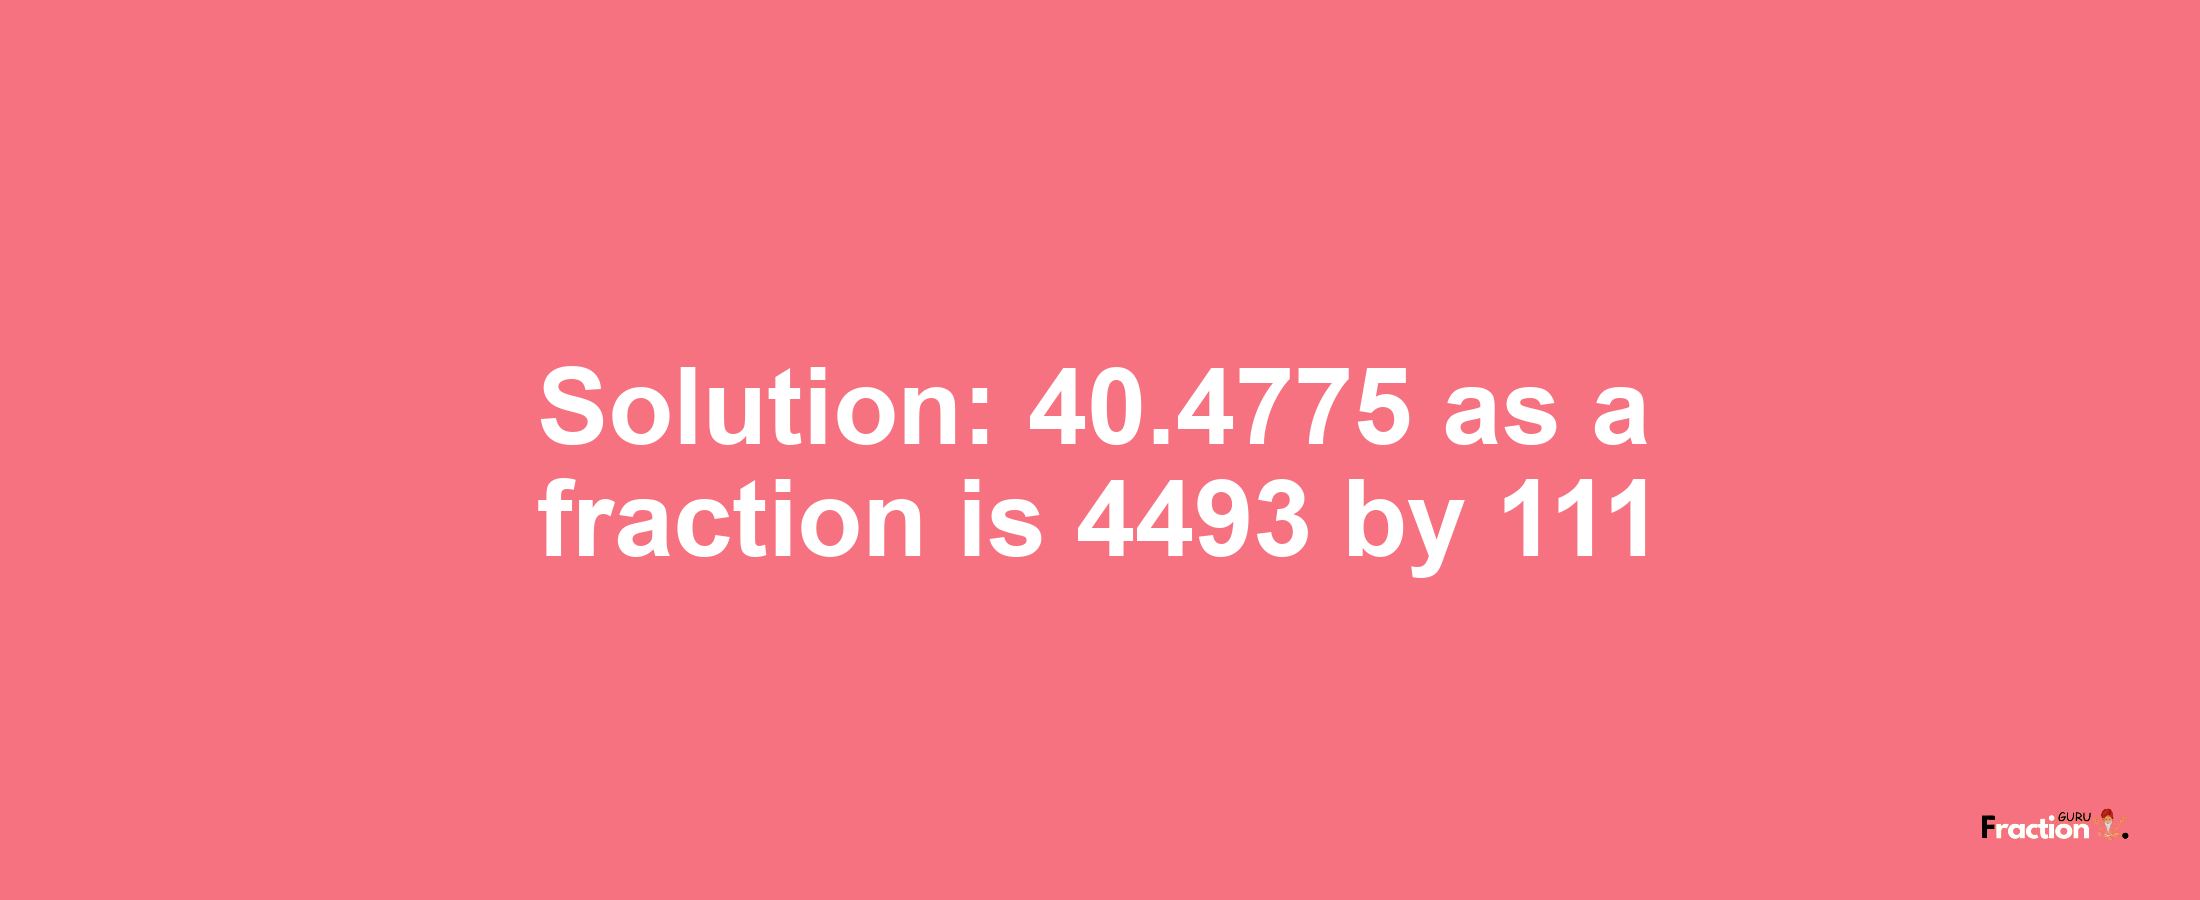 Solution:40.4775 as a fraction is 4493/111